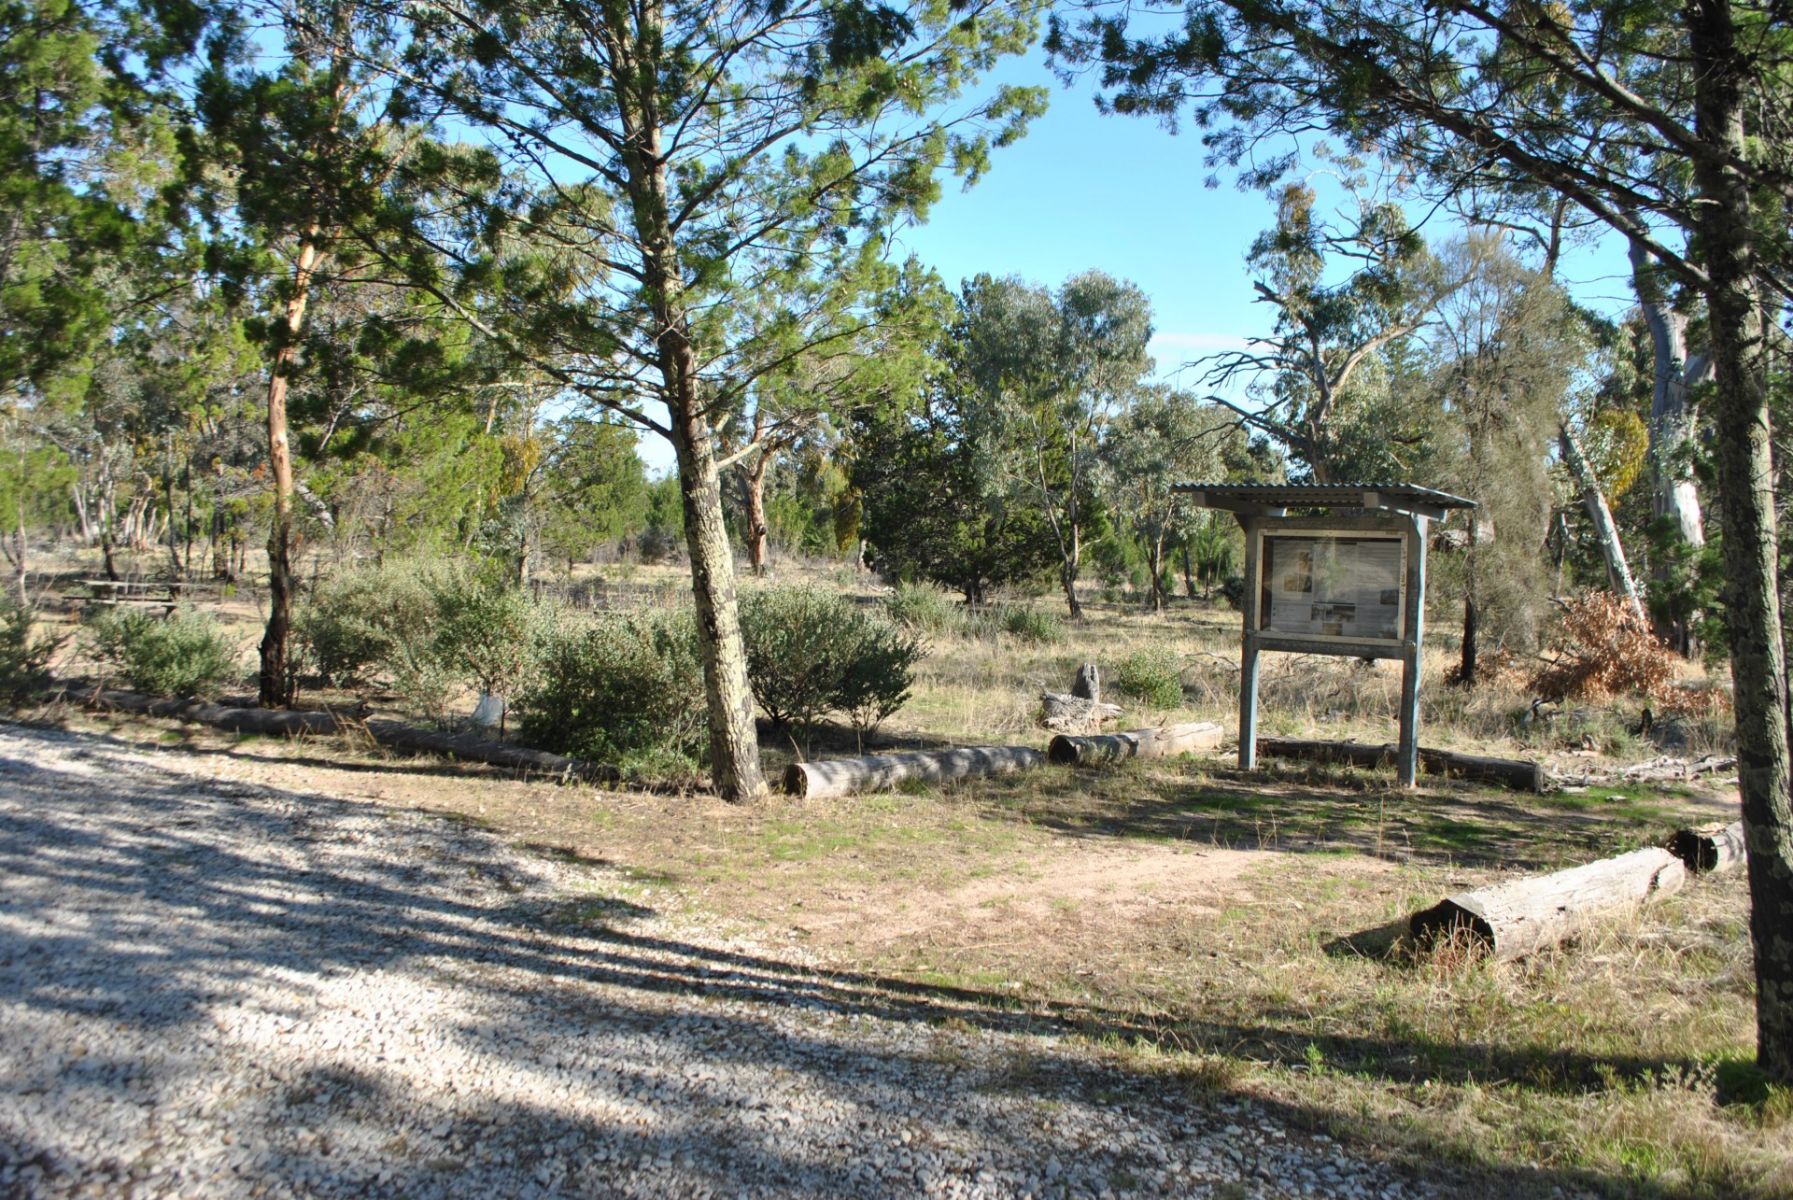 A gravel area and grass with an information signboard